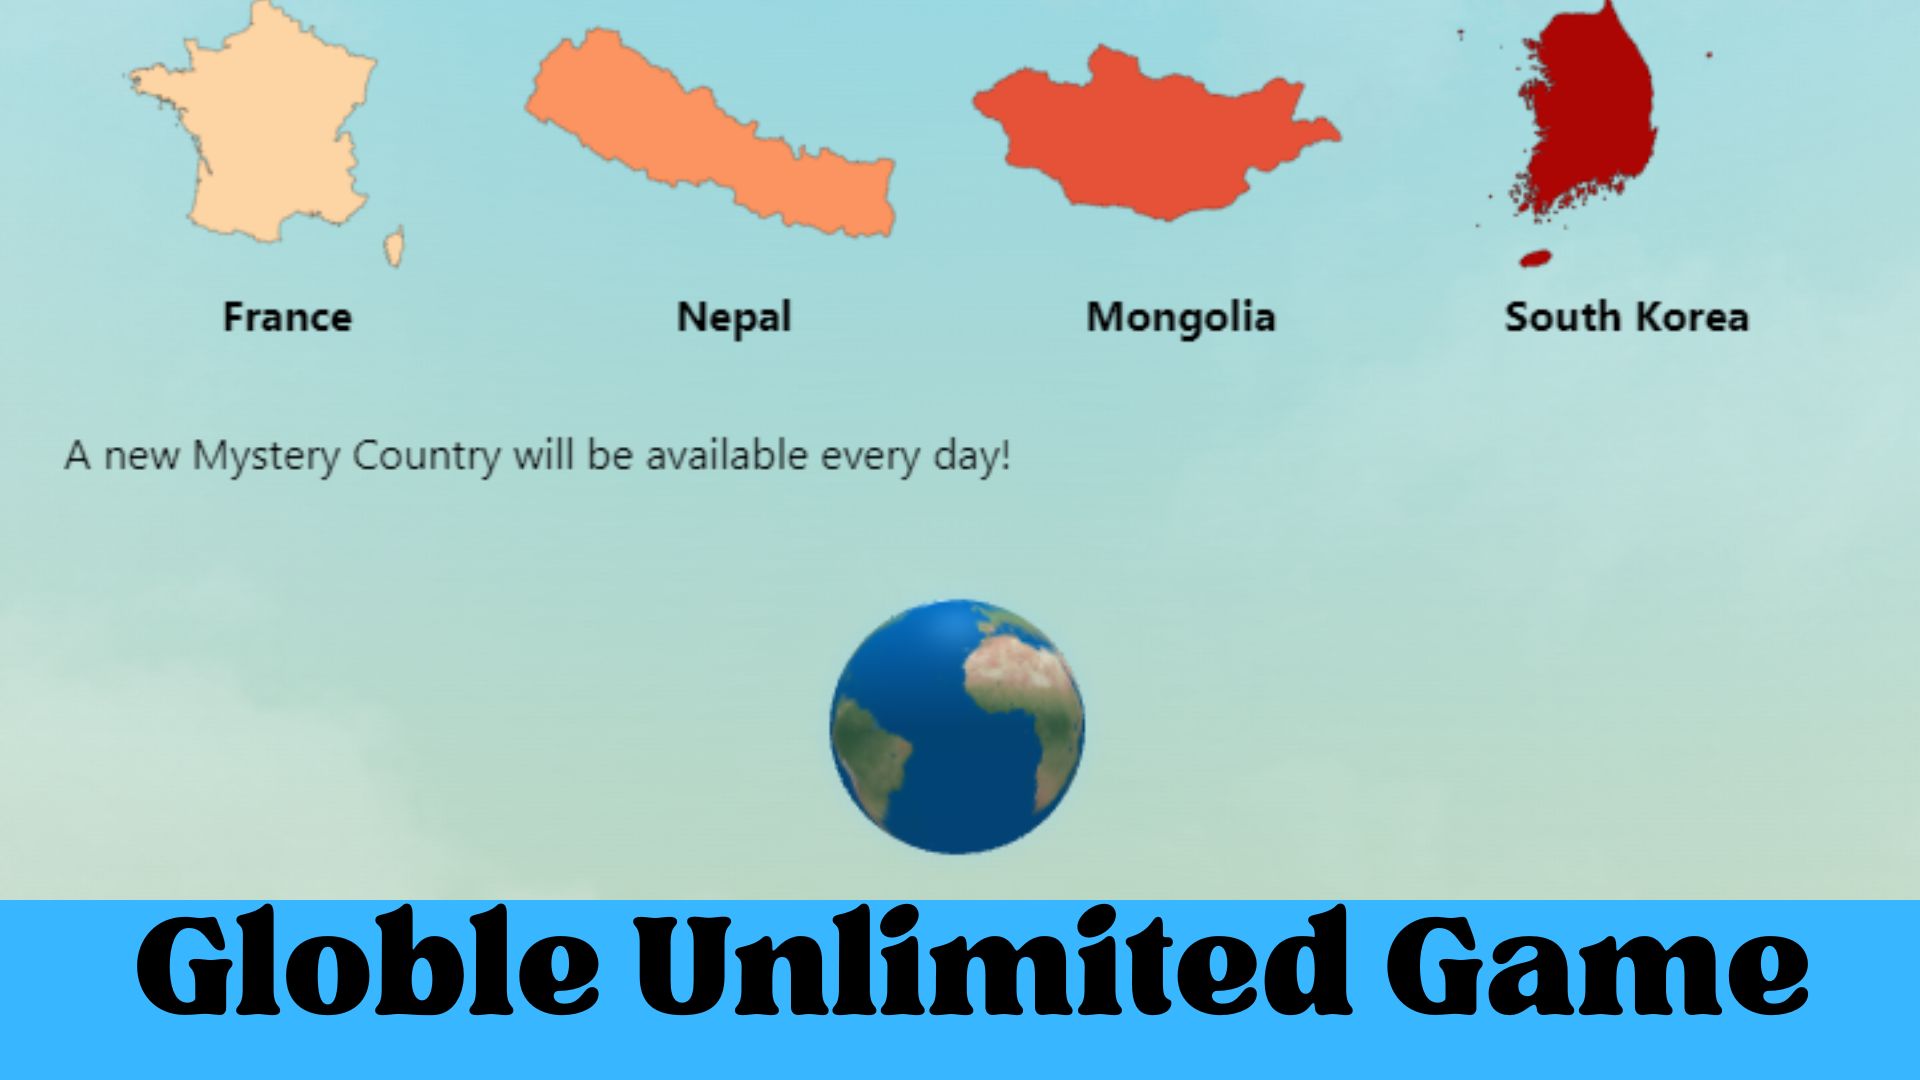 Globle Unlimited Game